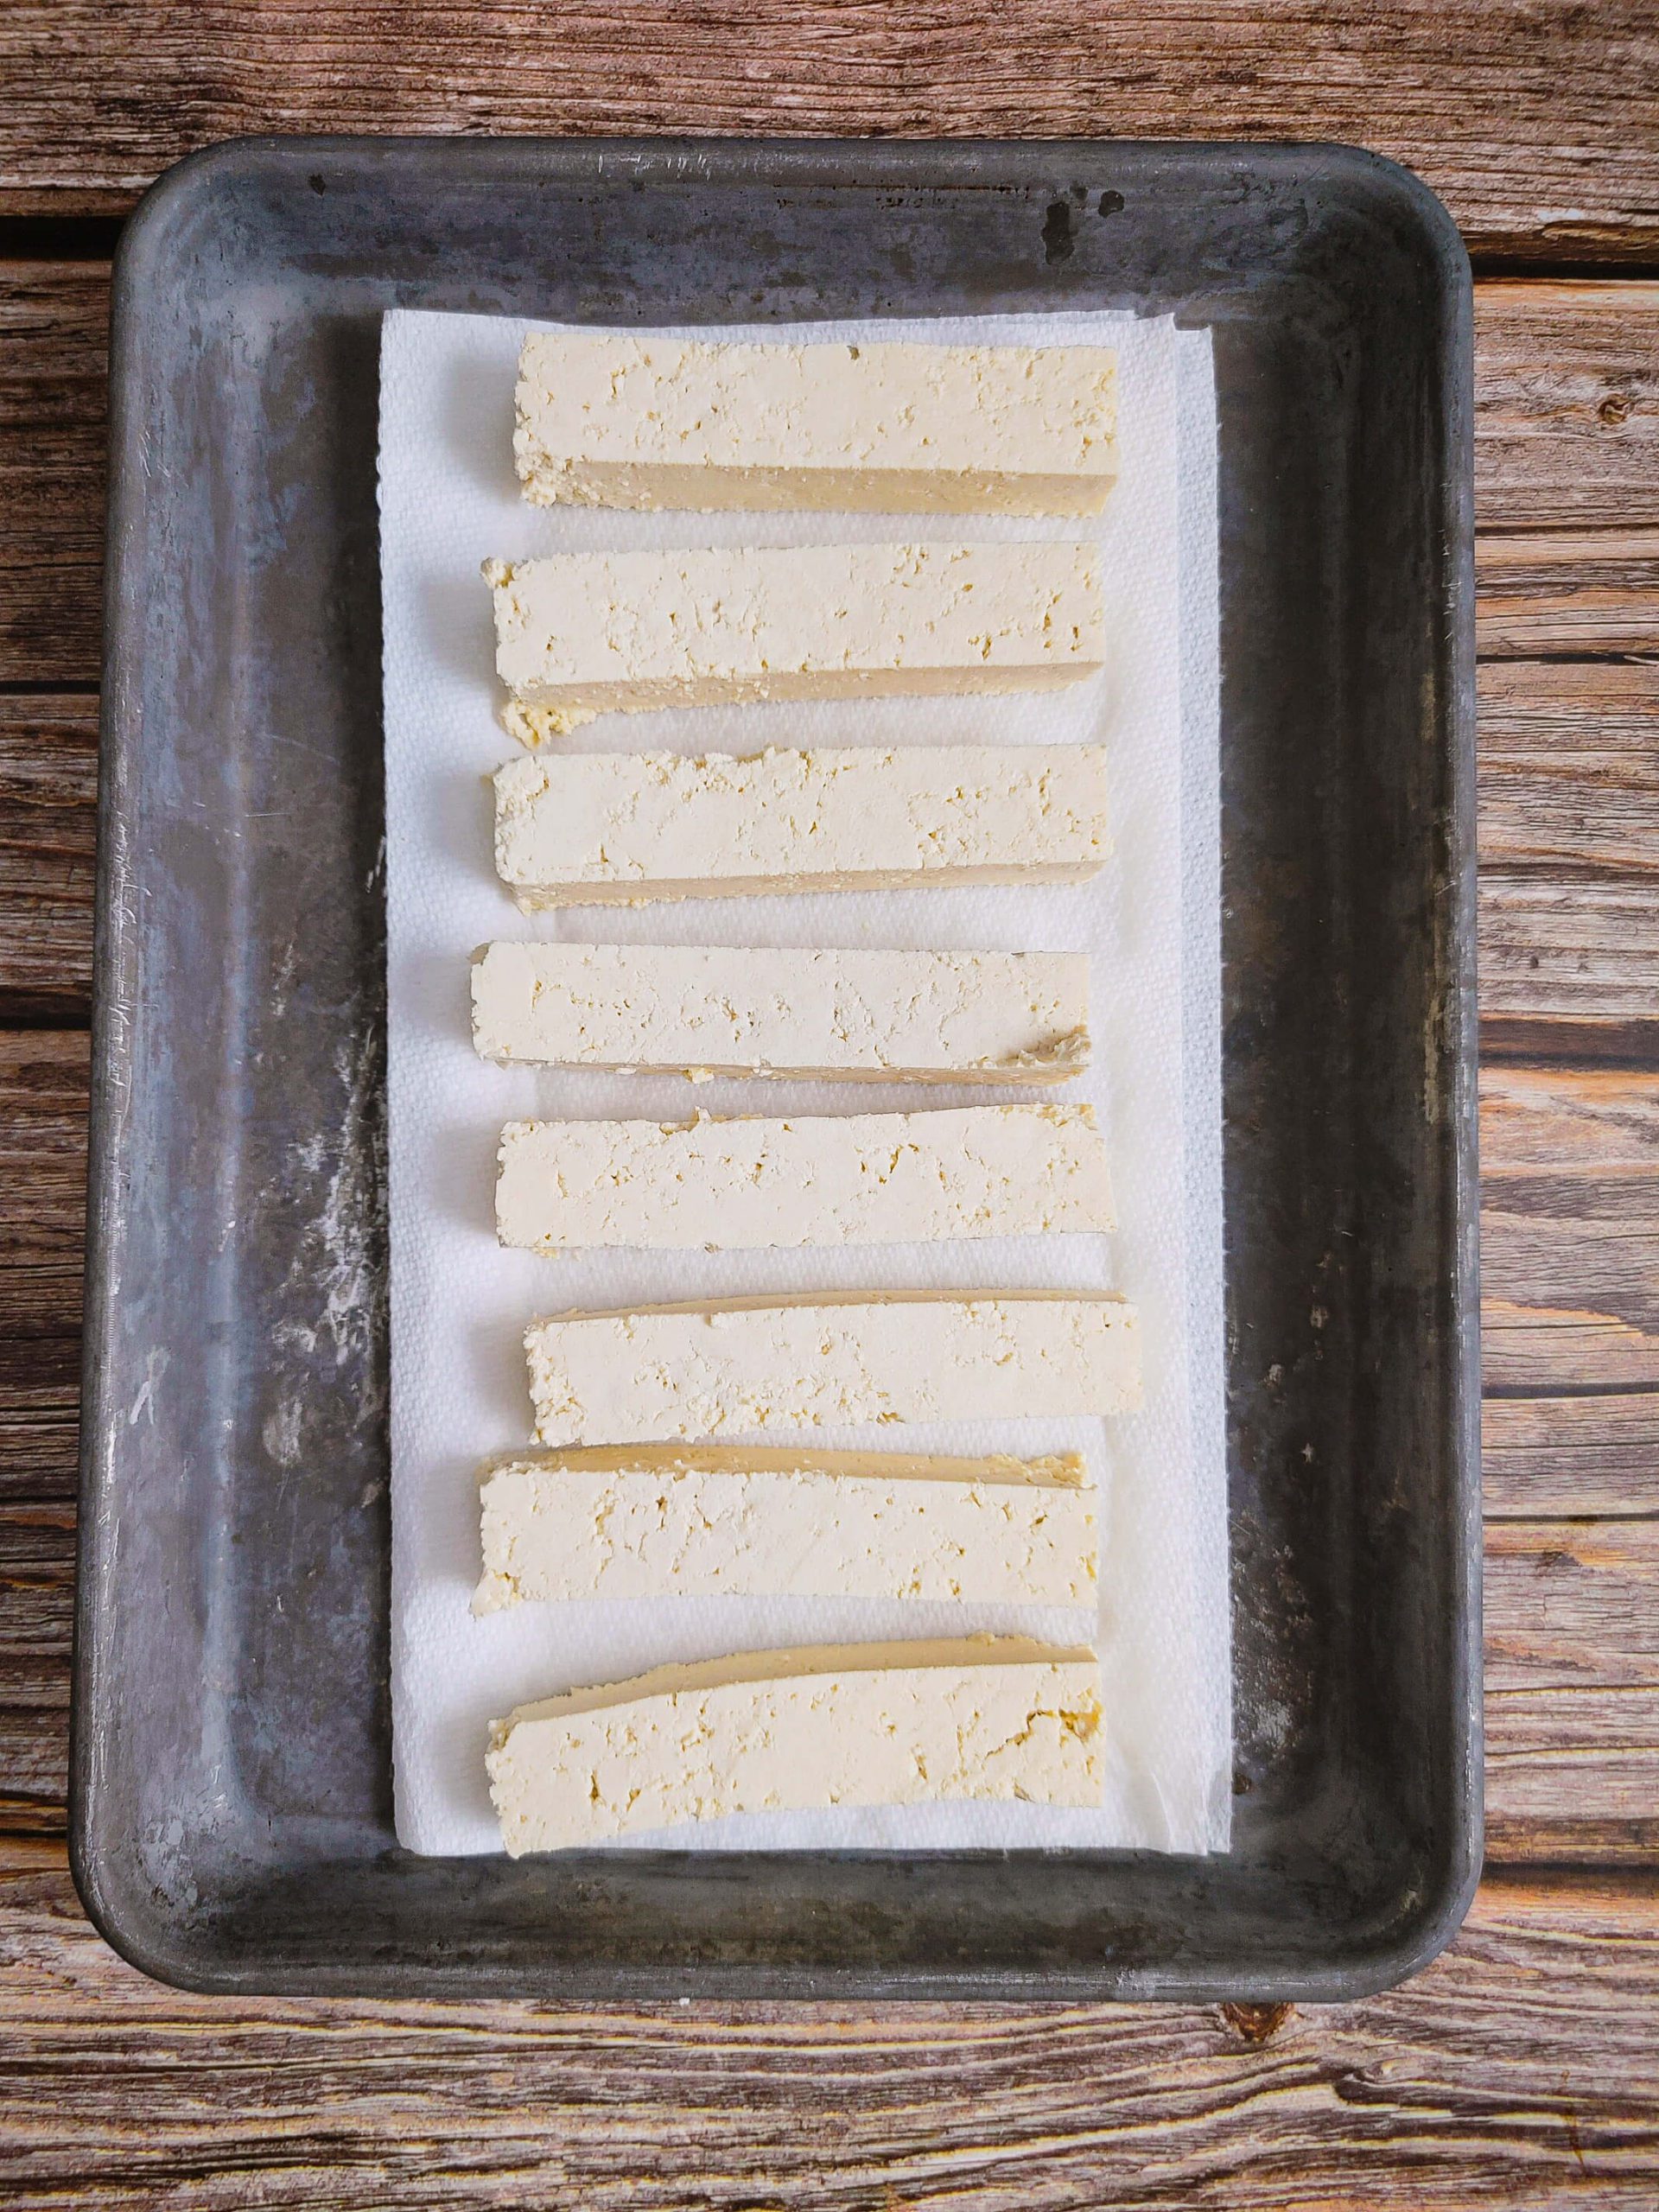 TOFU CUT AND READY TO DRAIN WATER